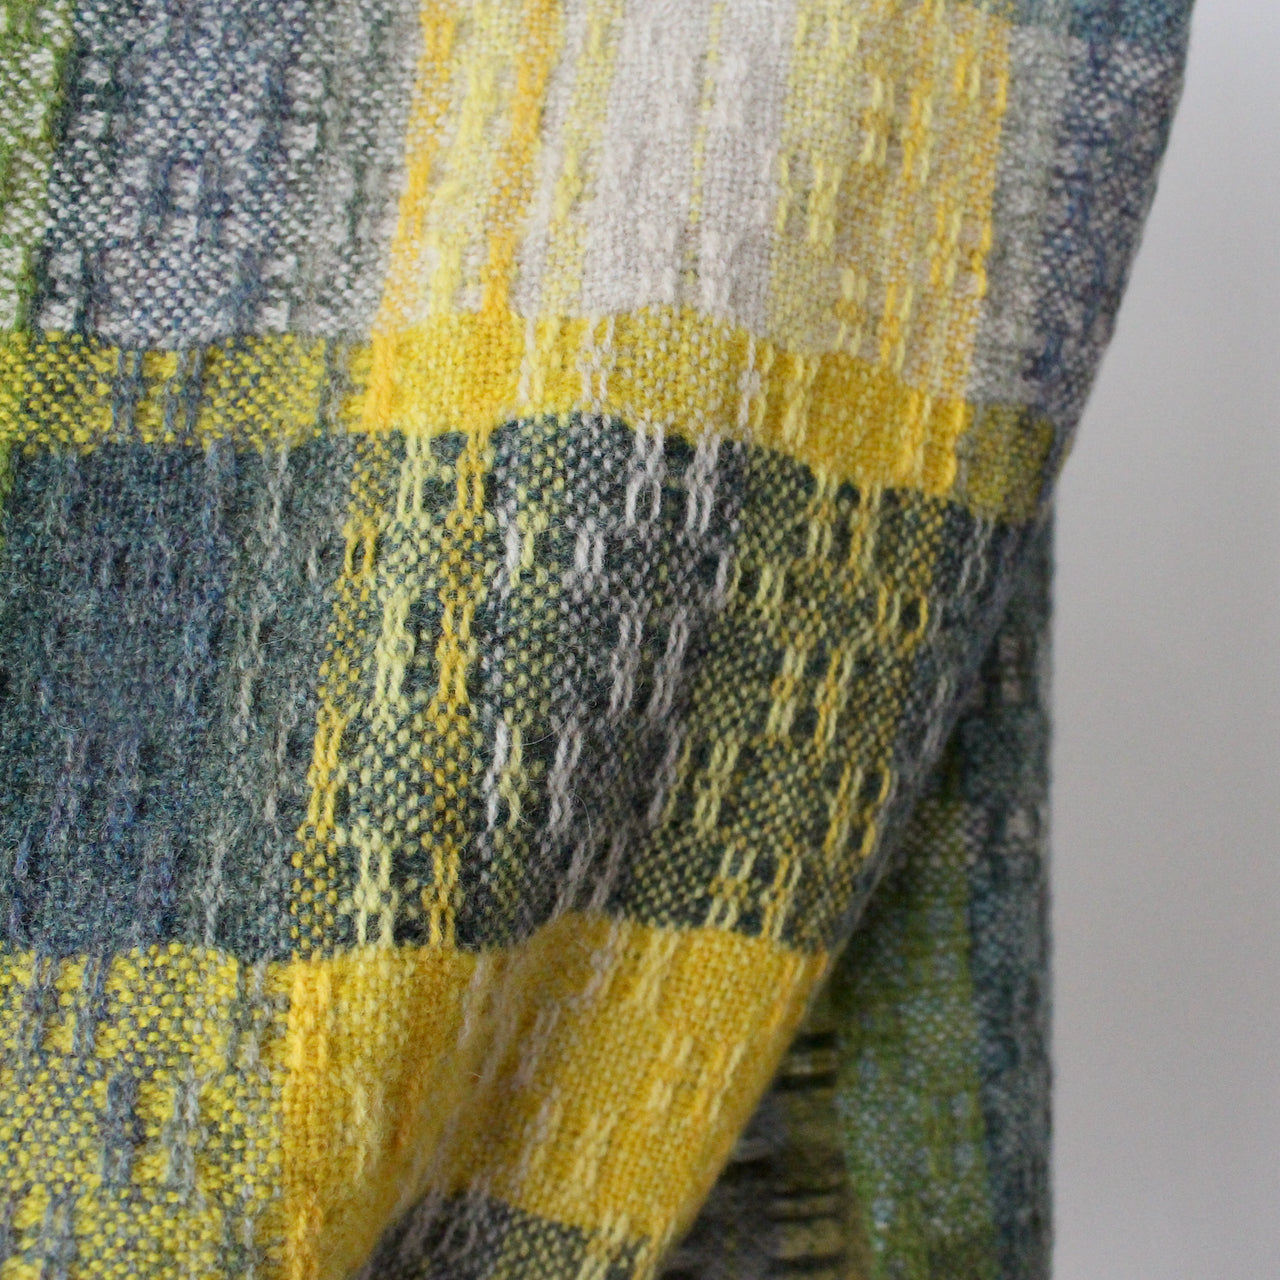 close up of textile designer Teresa Dunne's hand-woven scarf in shades of blue, green and yellow.